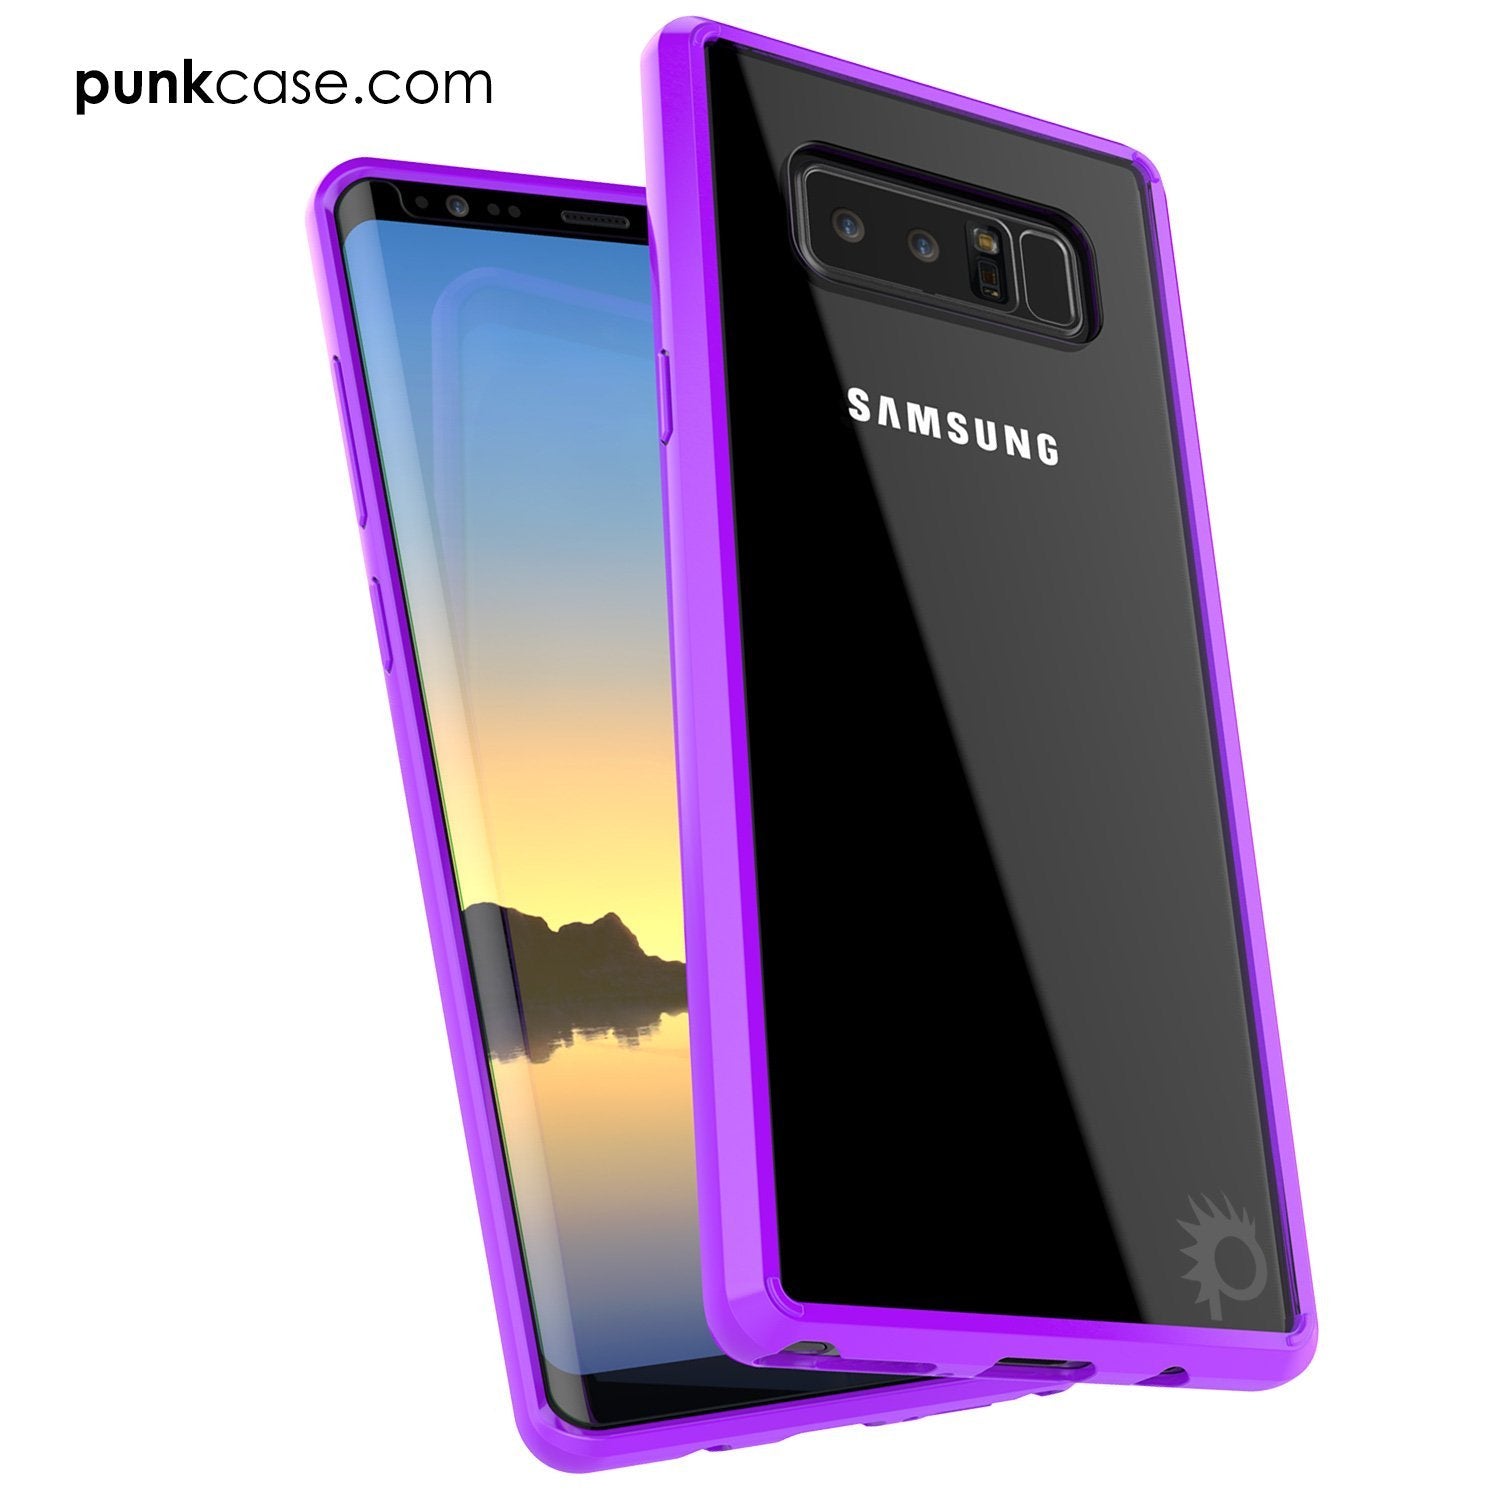 Galaxy Note 8 Case, PUNKcase [LUCID 2.0 Series] [Slim Fit] Armor Cover w/Integrated Anti-Shock System & PUNKSHIELD Screen Protector [Purple] - PunkCase NZ